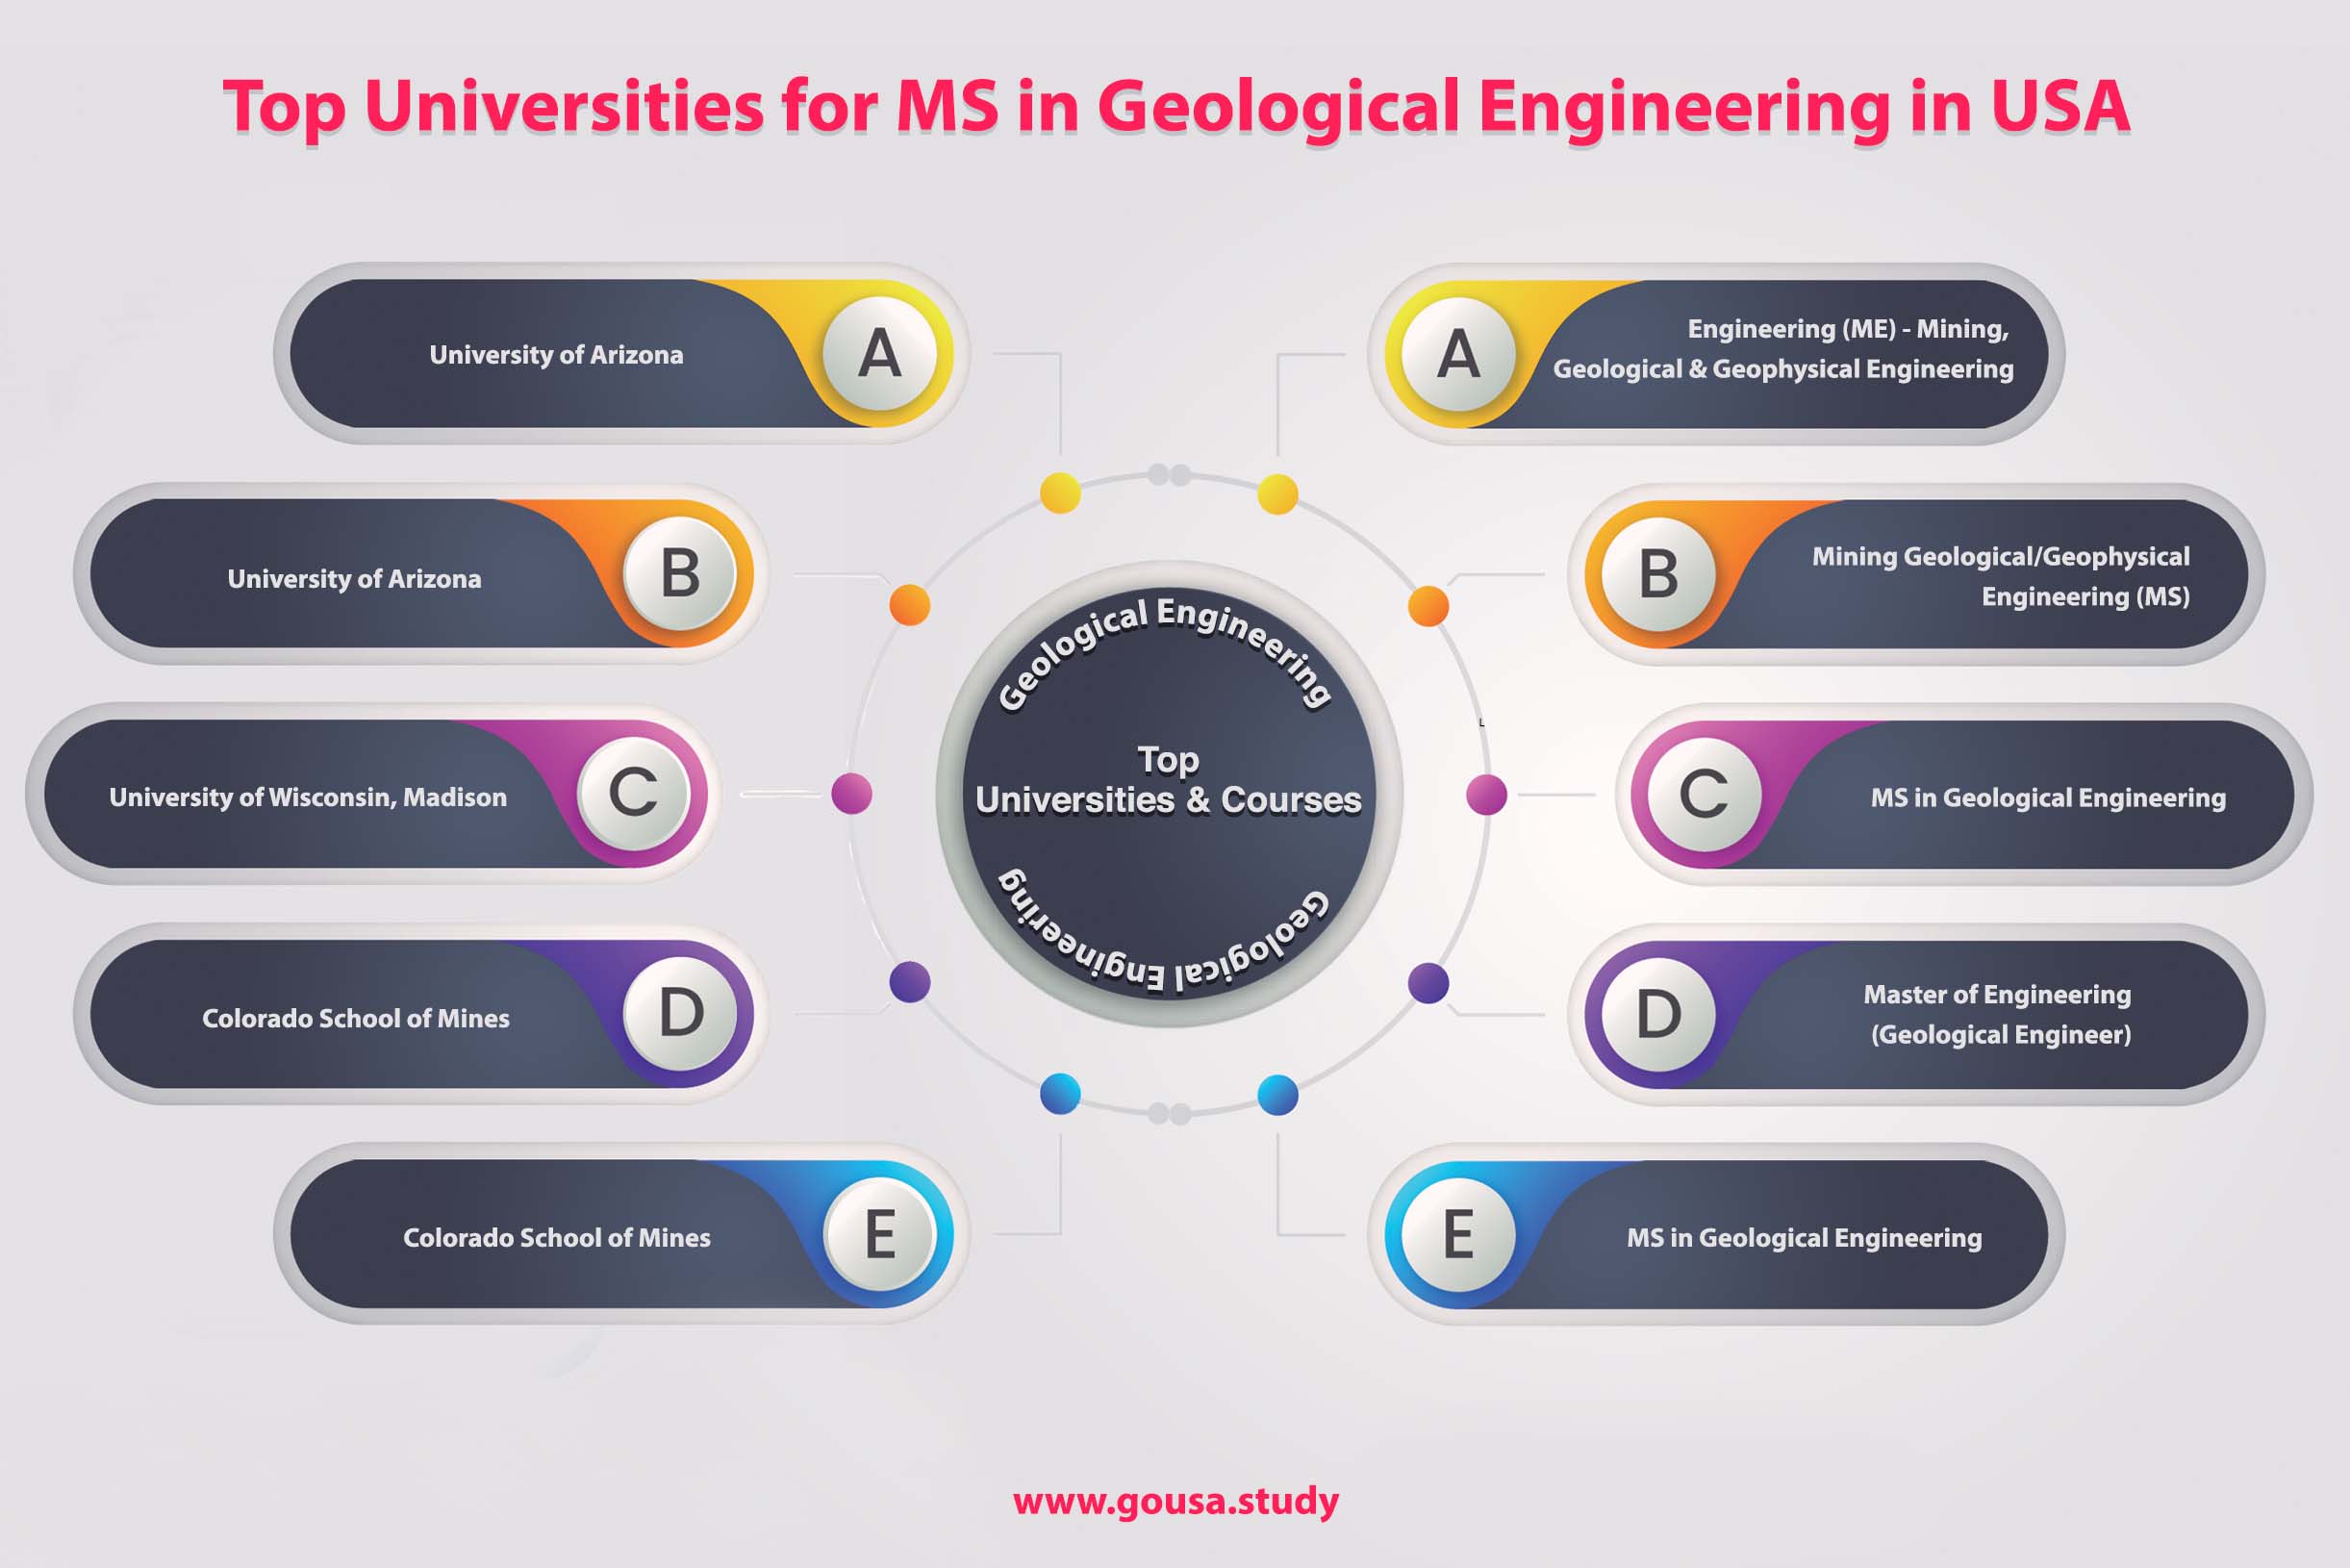 Top Universities for MS in Geological Engineering in USA